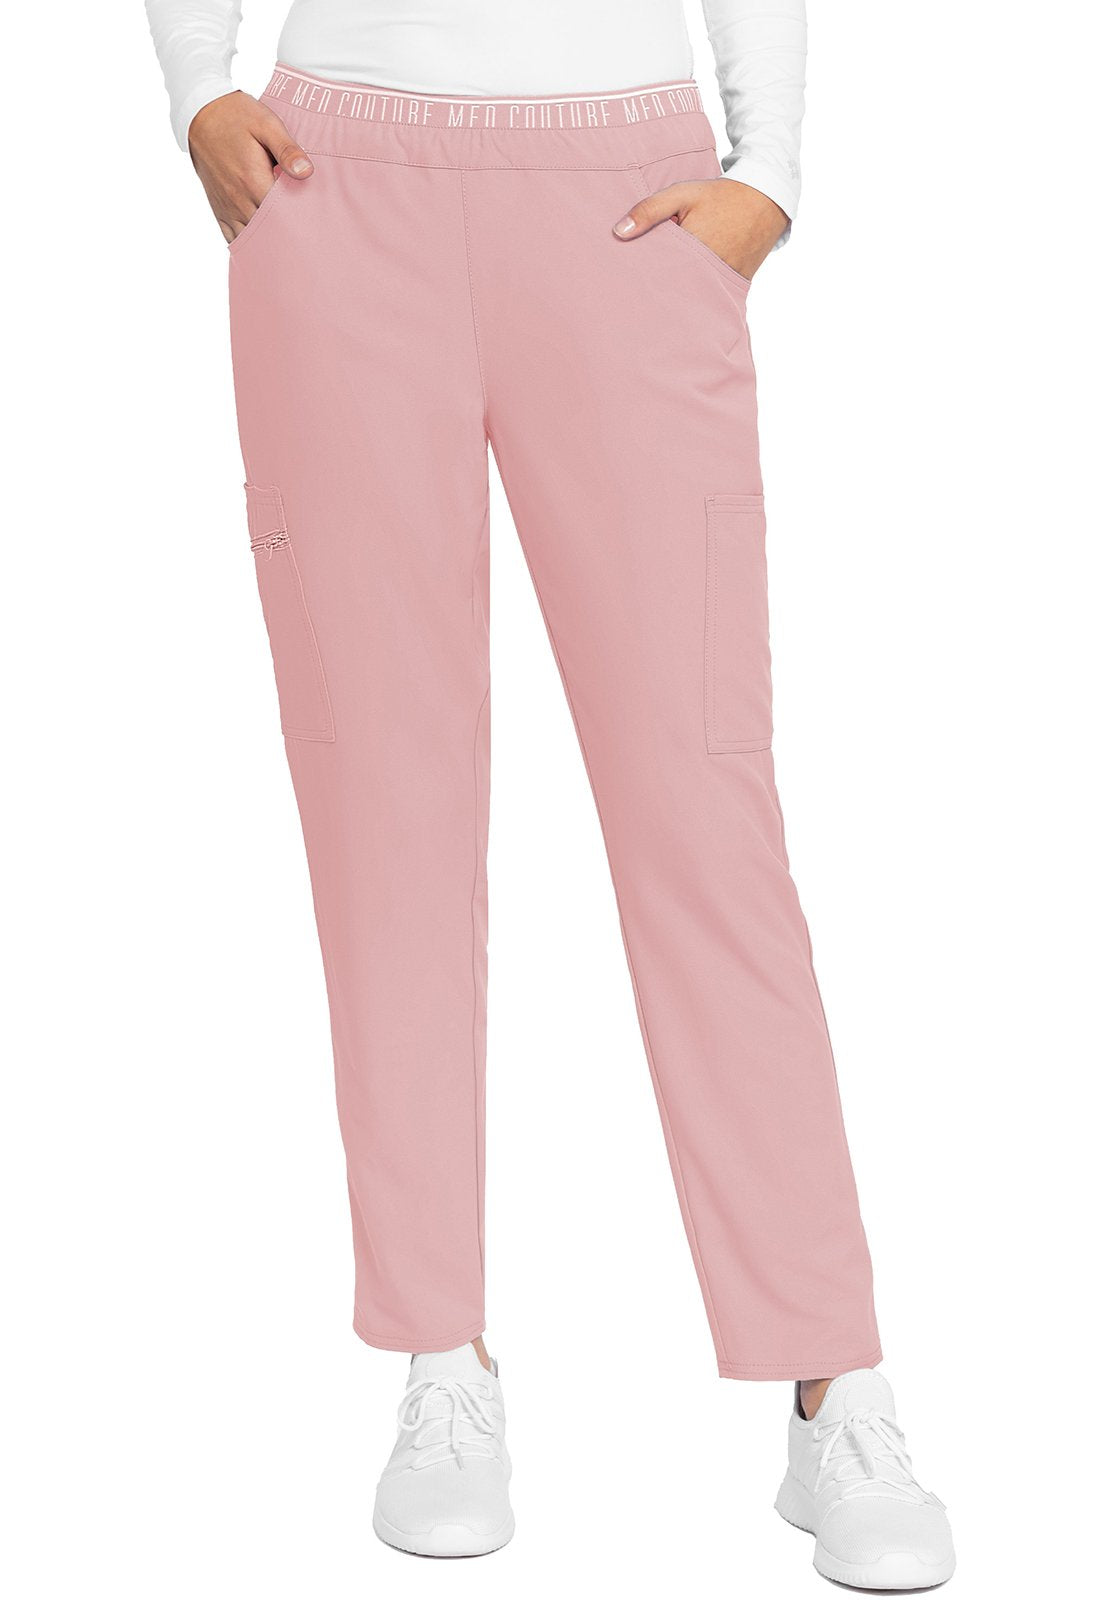 Med Couture MC Insight Perfectly Pink / 3XL MC Insight  Mid-rise Tapered Leg Pull-on Scrub Pant MC009